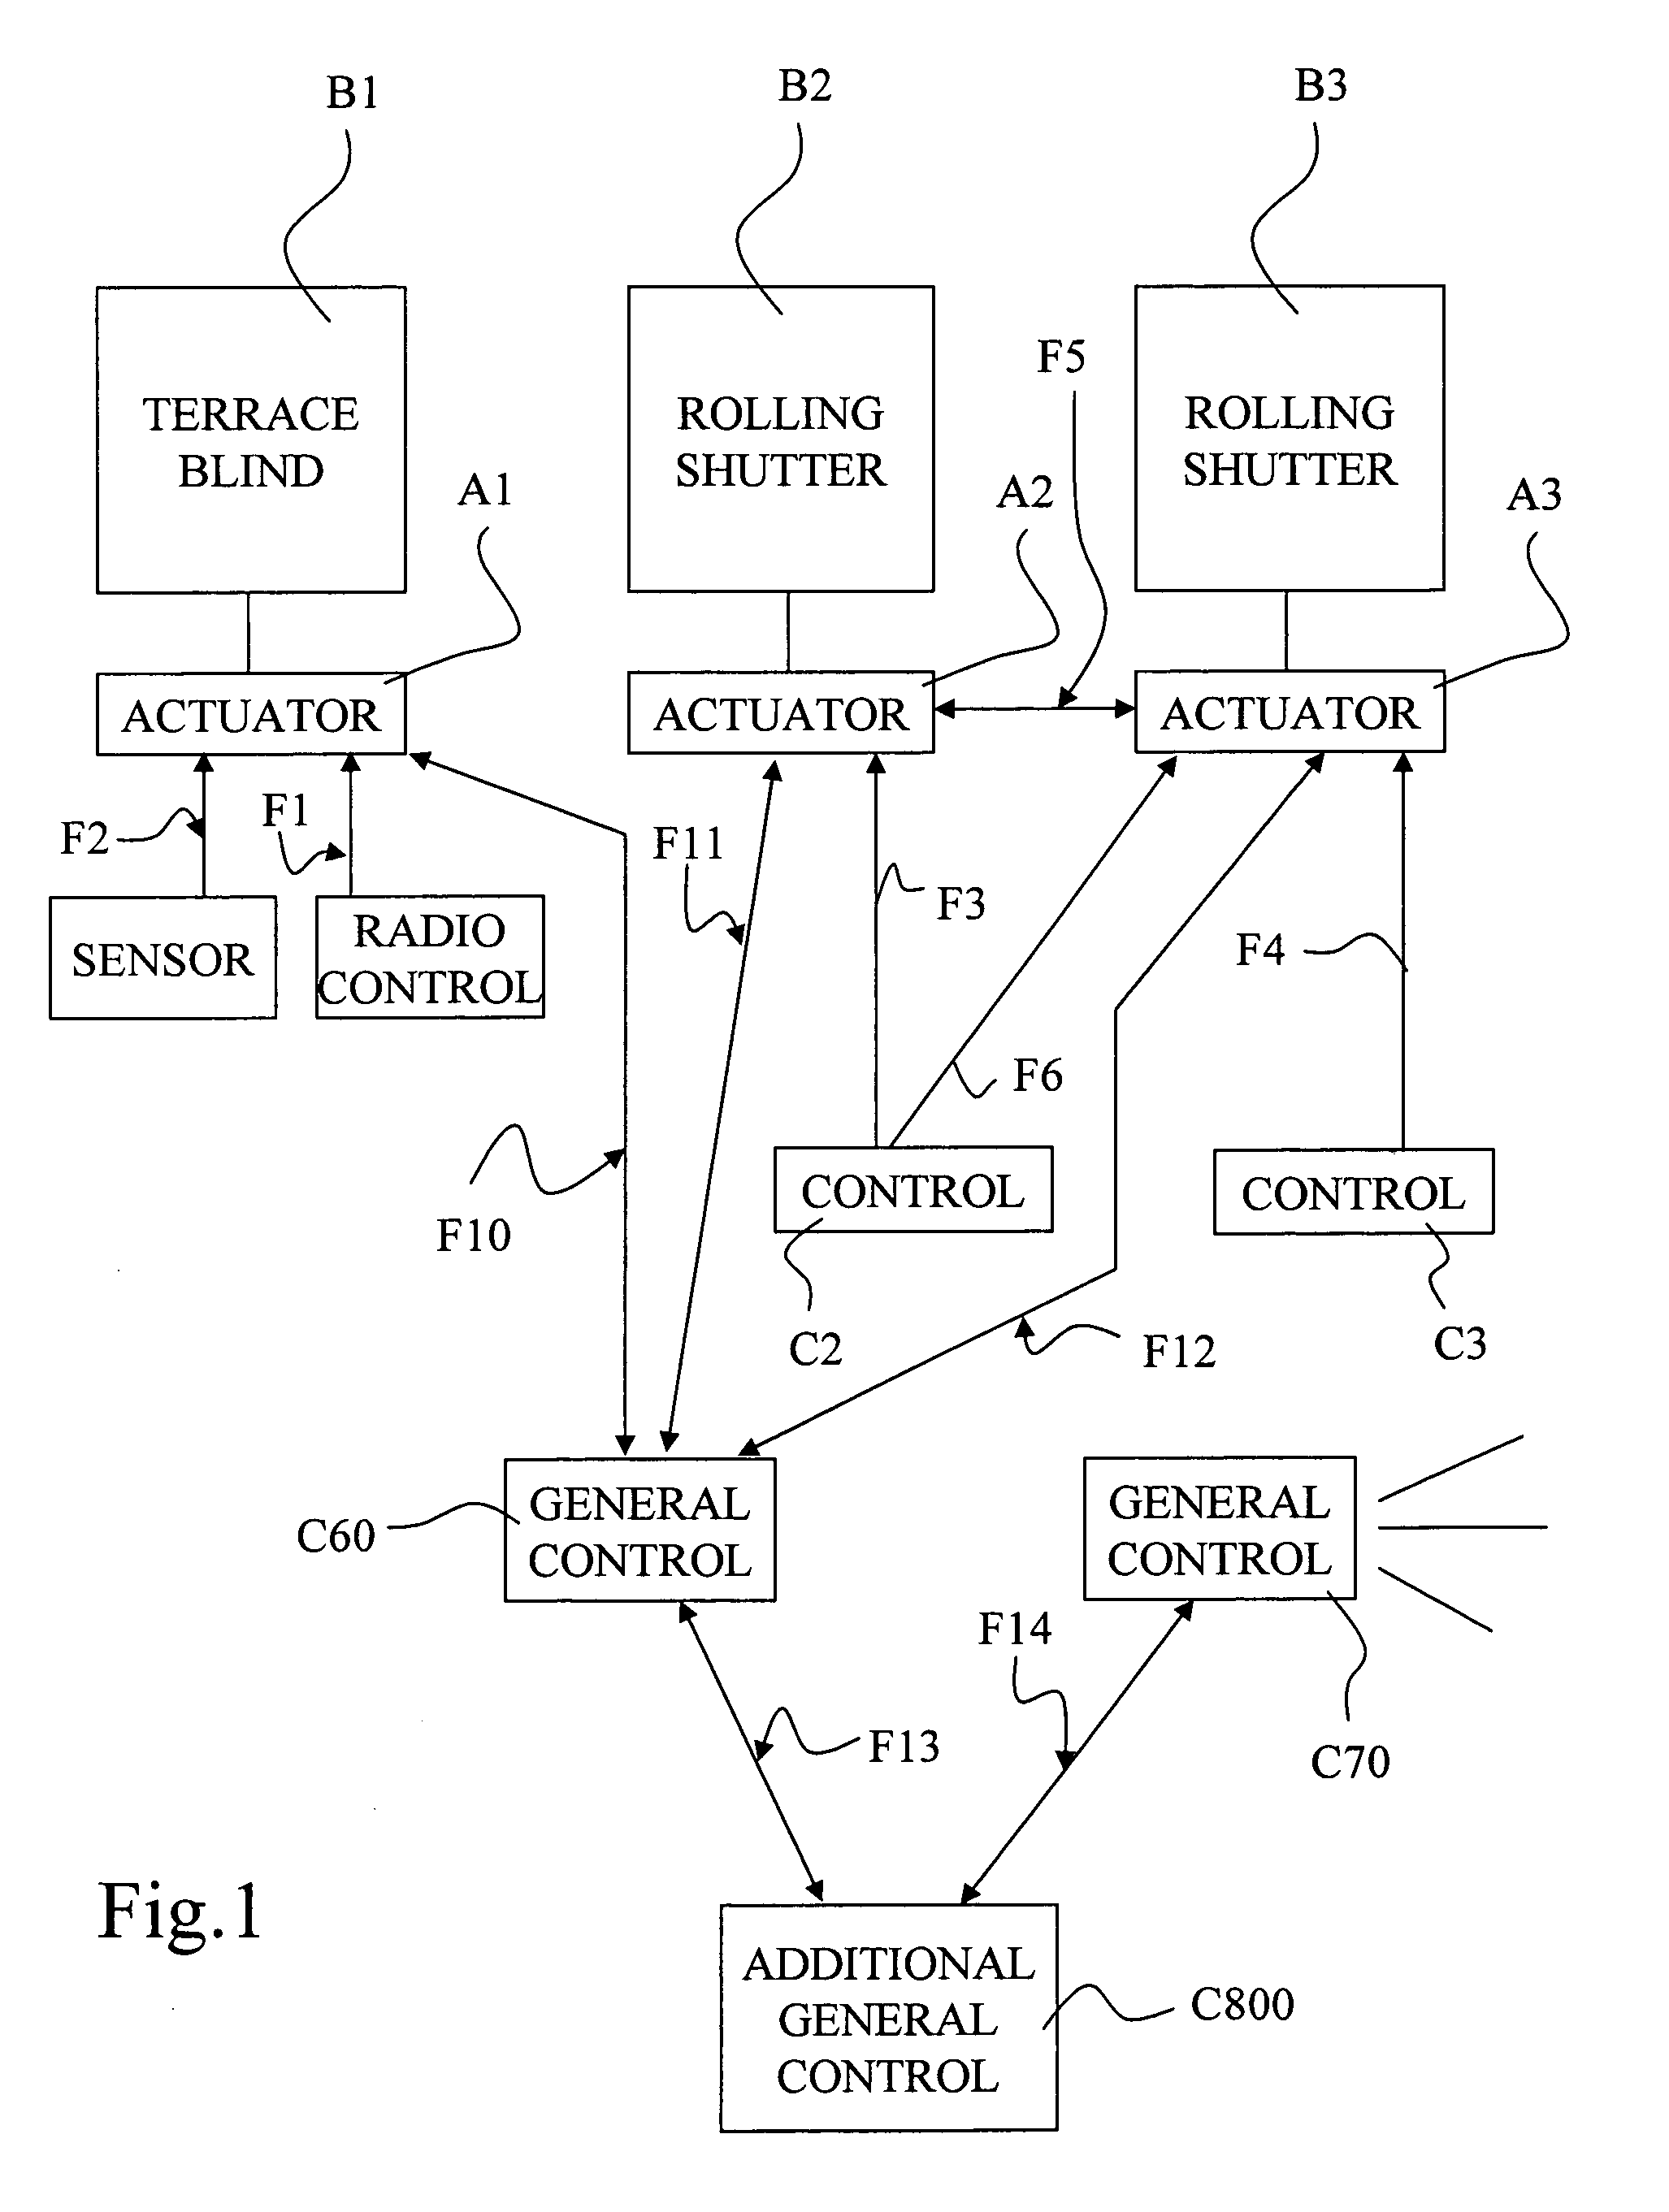 Method for constituting a home automation network